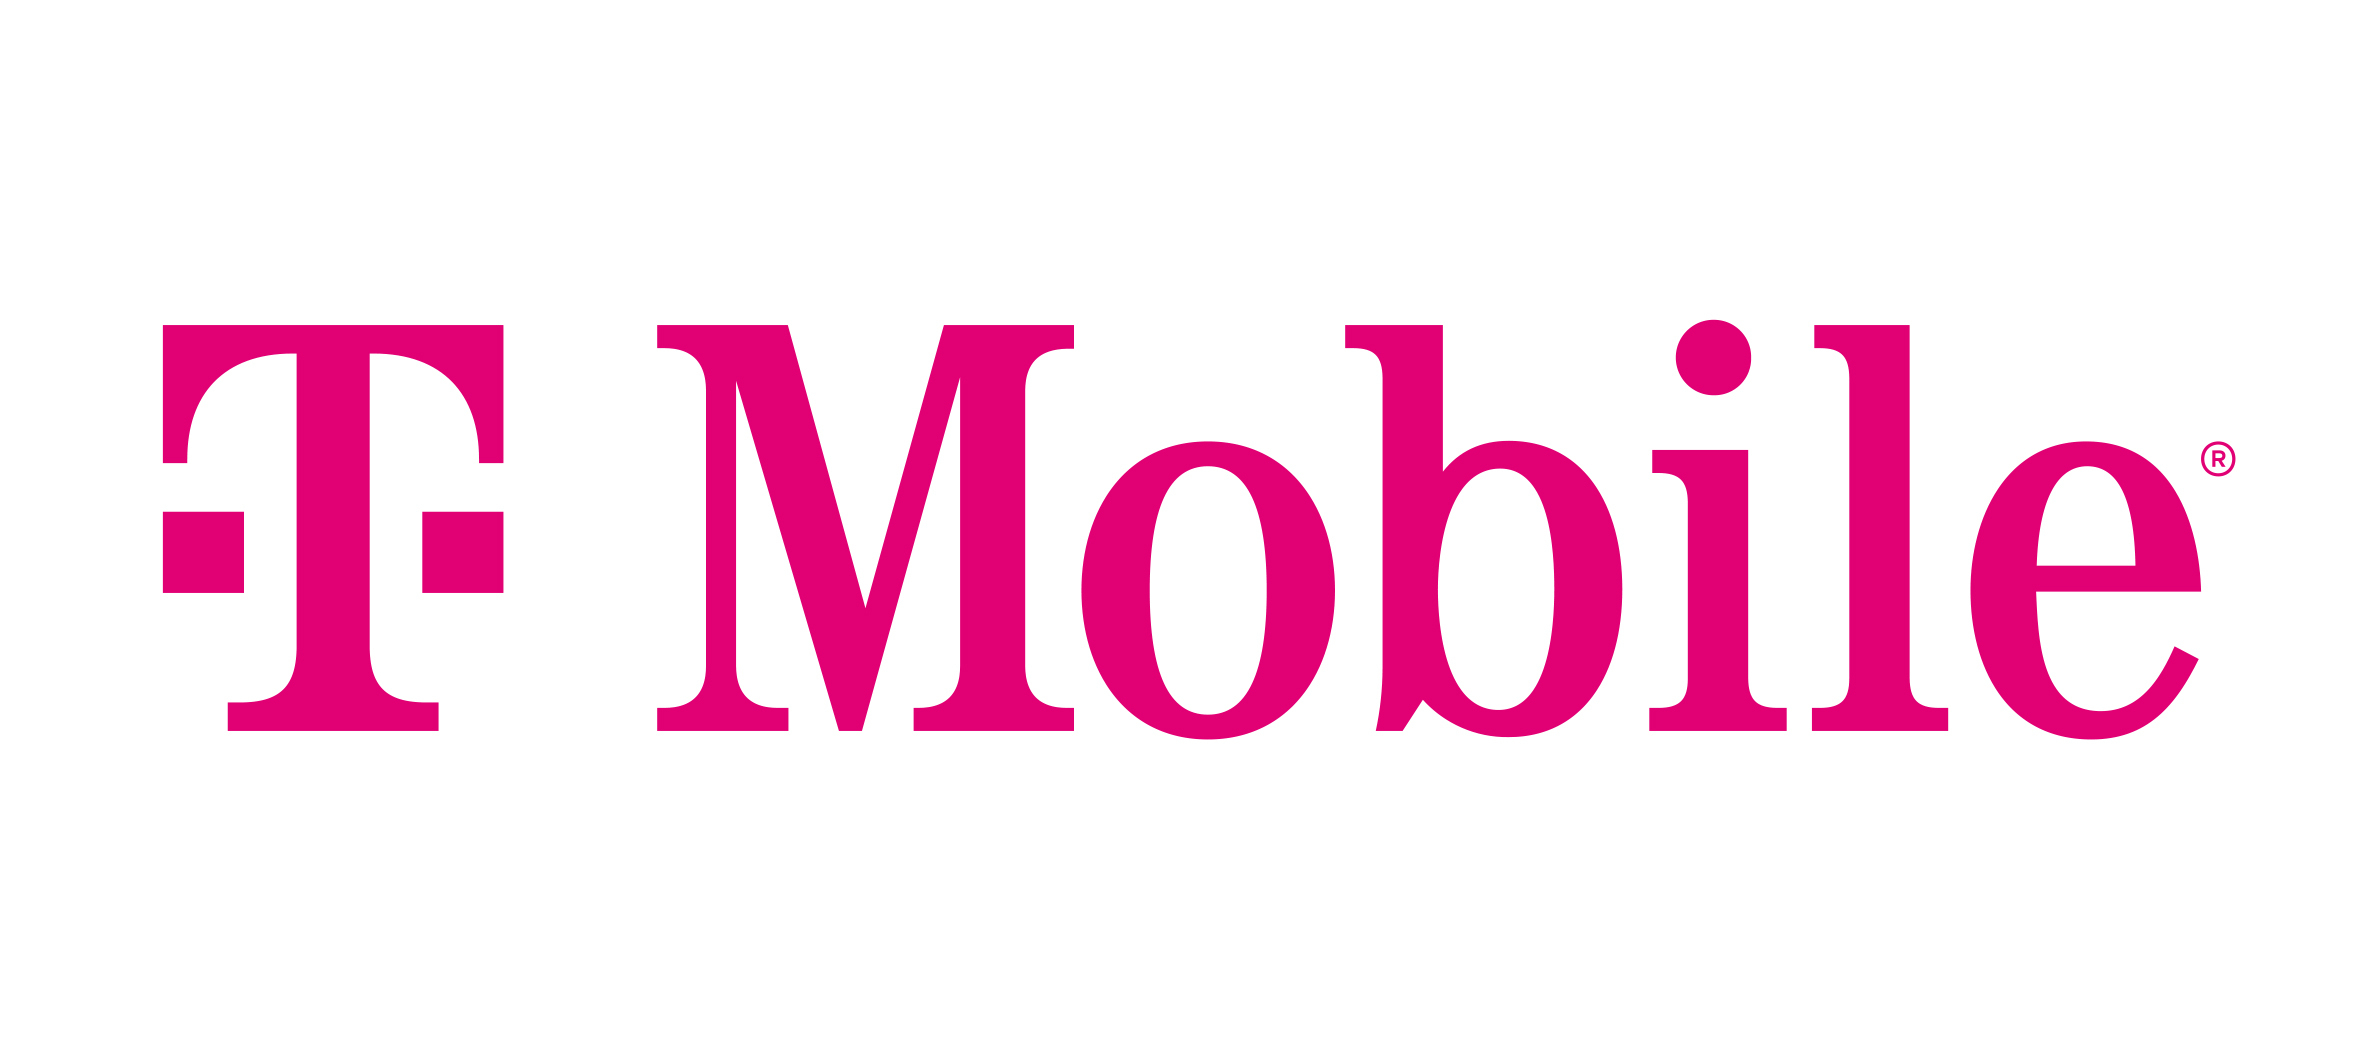 T-Mobile's 5G Upgrades, Extends New York's Digital Space